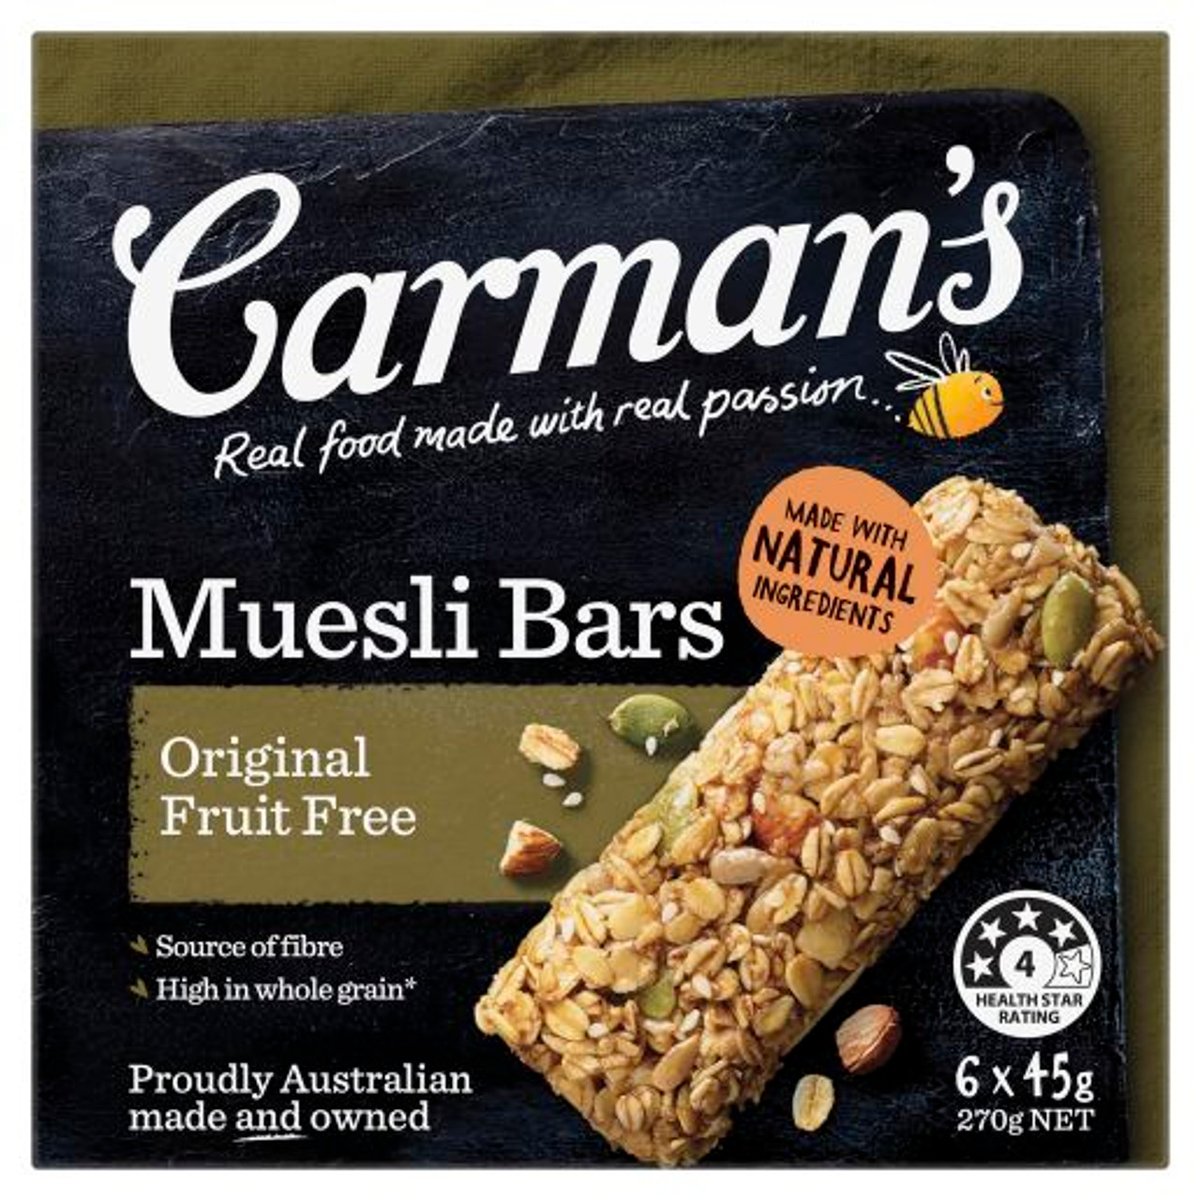 Just noticed my Muesli Bar ingredients lists 'Natural Flavour'. This is in many foods. Research: 'Natural Flavour can contain more than 100 Chemicals including solvents, emulsifiers and preservatives.' BEWARE☠️